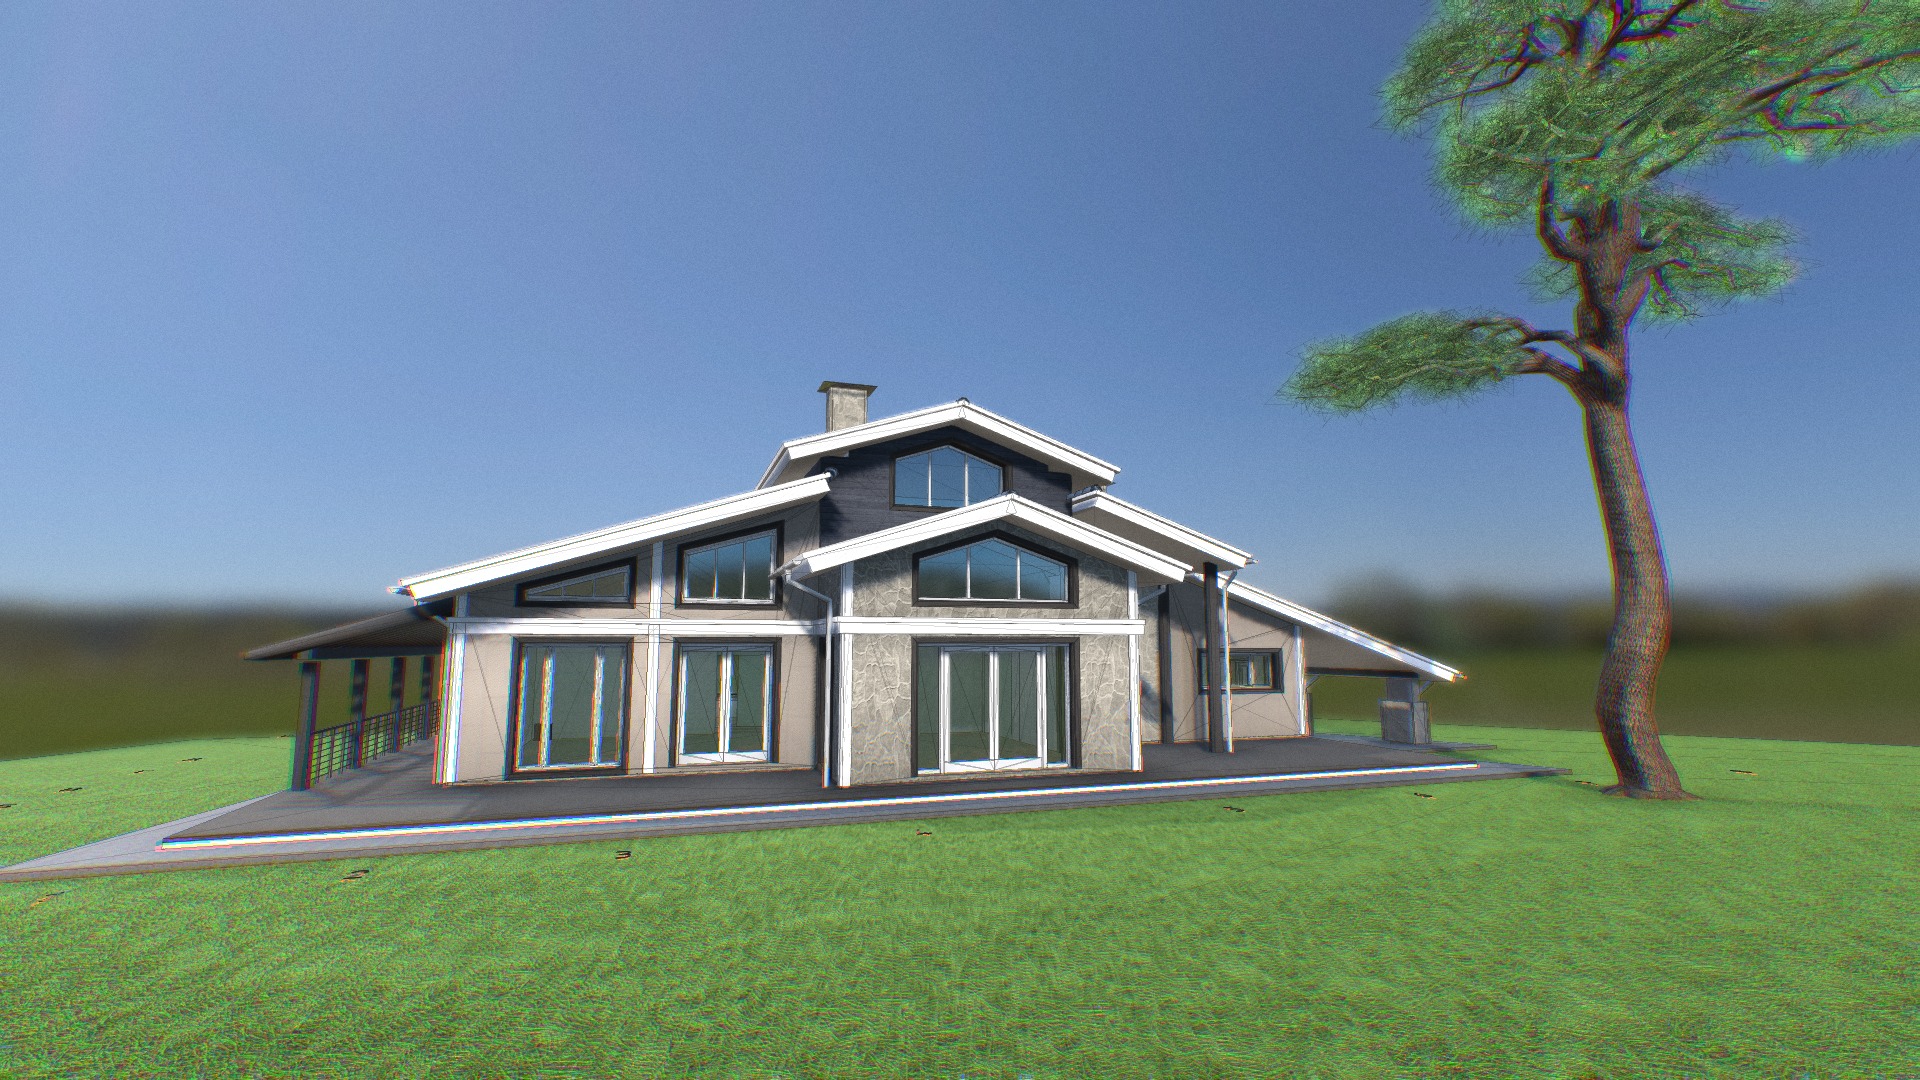 3D model Cocept - This is a 3D model of the Cocept. The 3D model is about a house with a tree in the front.